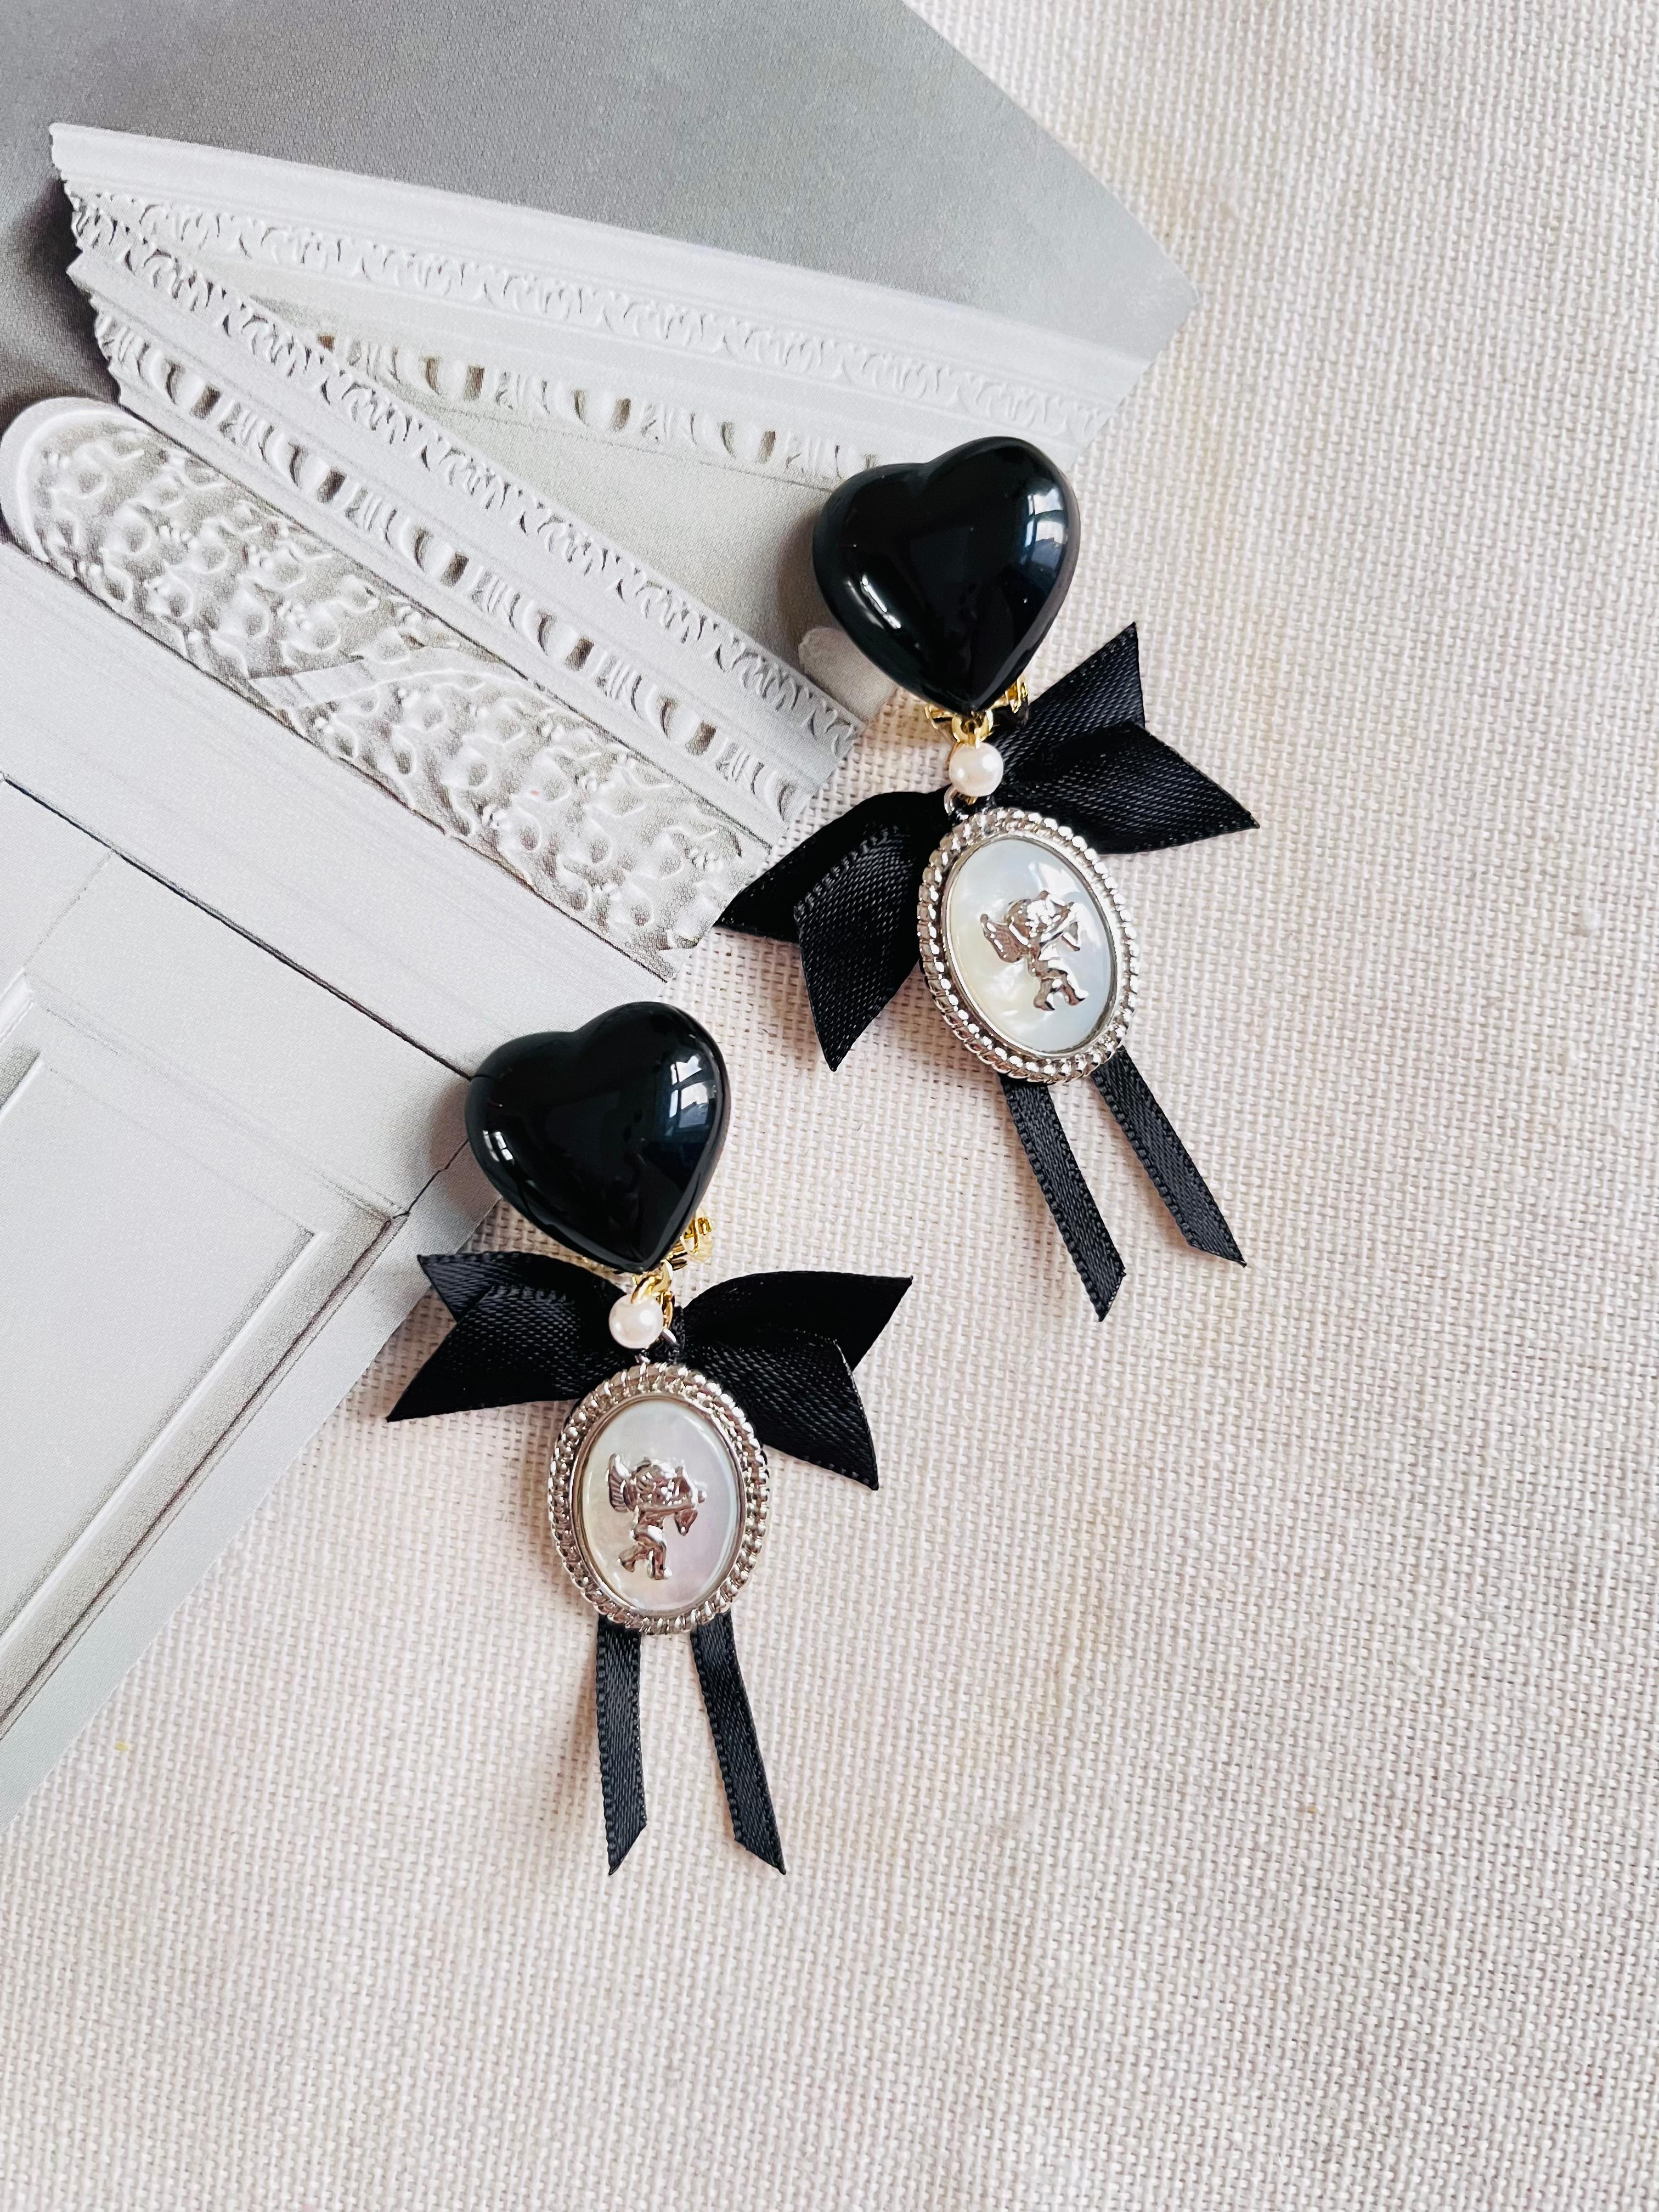 High quality and handmade. Excellent gift for lady.

Wear them on casual, prom, holiday...

Material: Cloth, Alloy, Faux stone.

Size: 5.8*4.5 cm.

Weight: 5 g/ each.

_ _ _

Great for everyday wear. Come with velvet pouch and beautiful